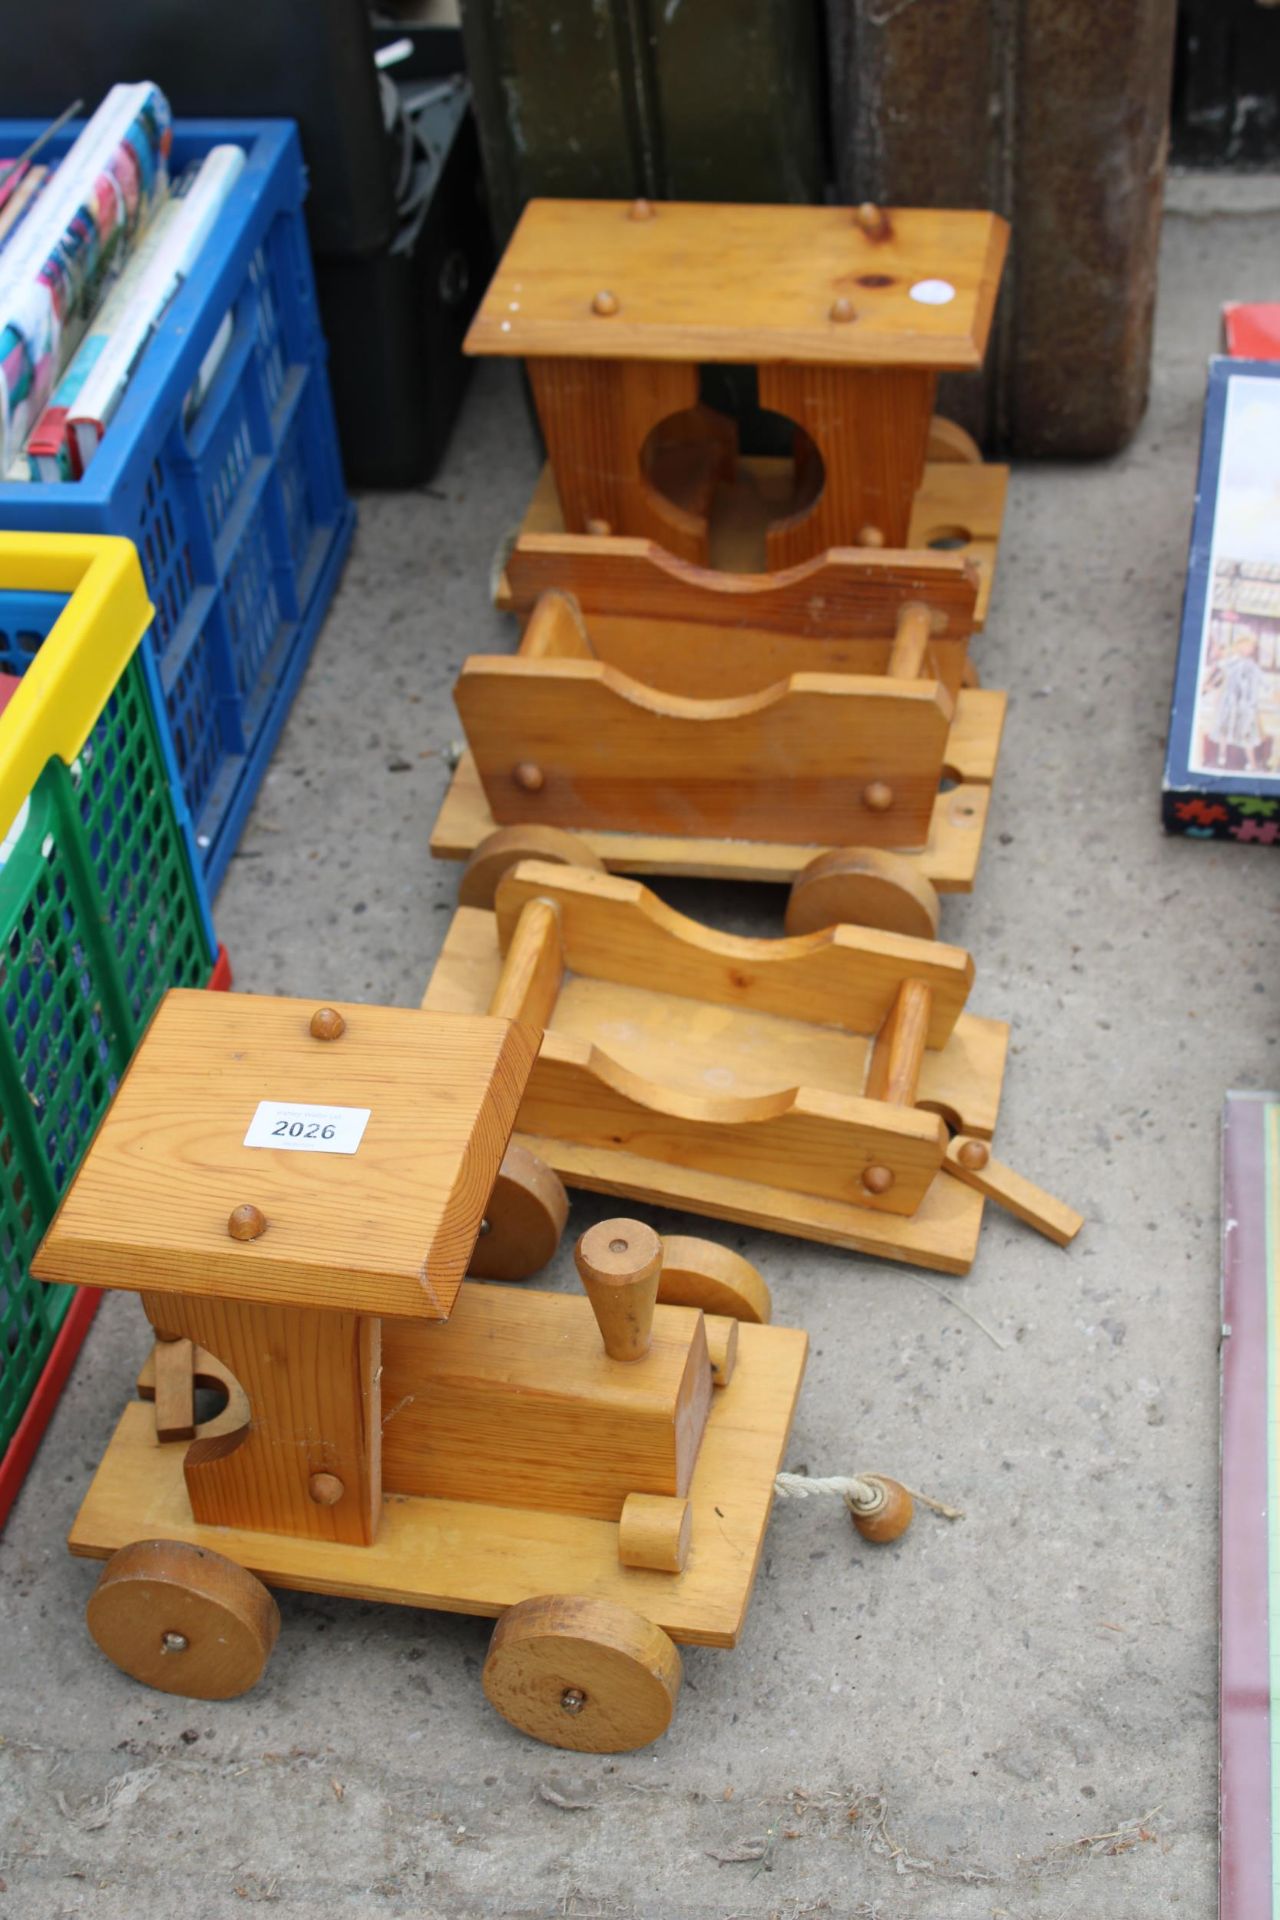 A WOODEN DISPLAY TRAIN